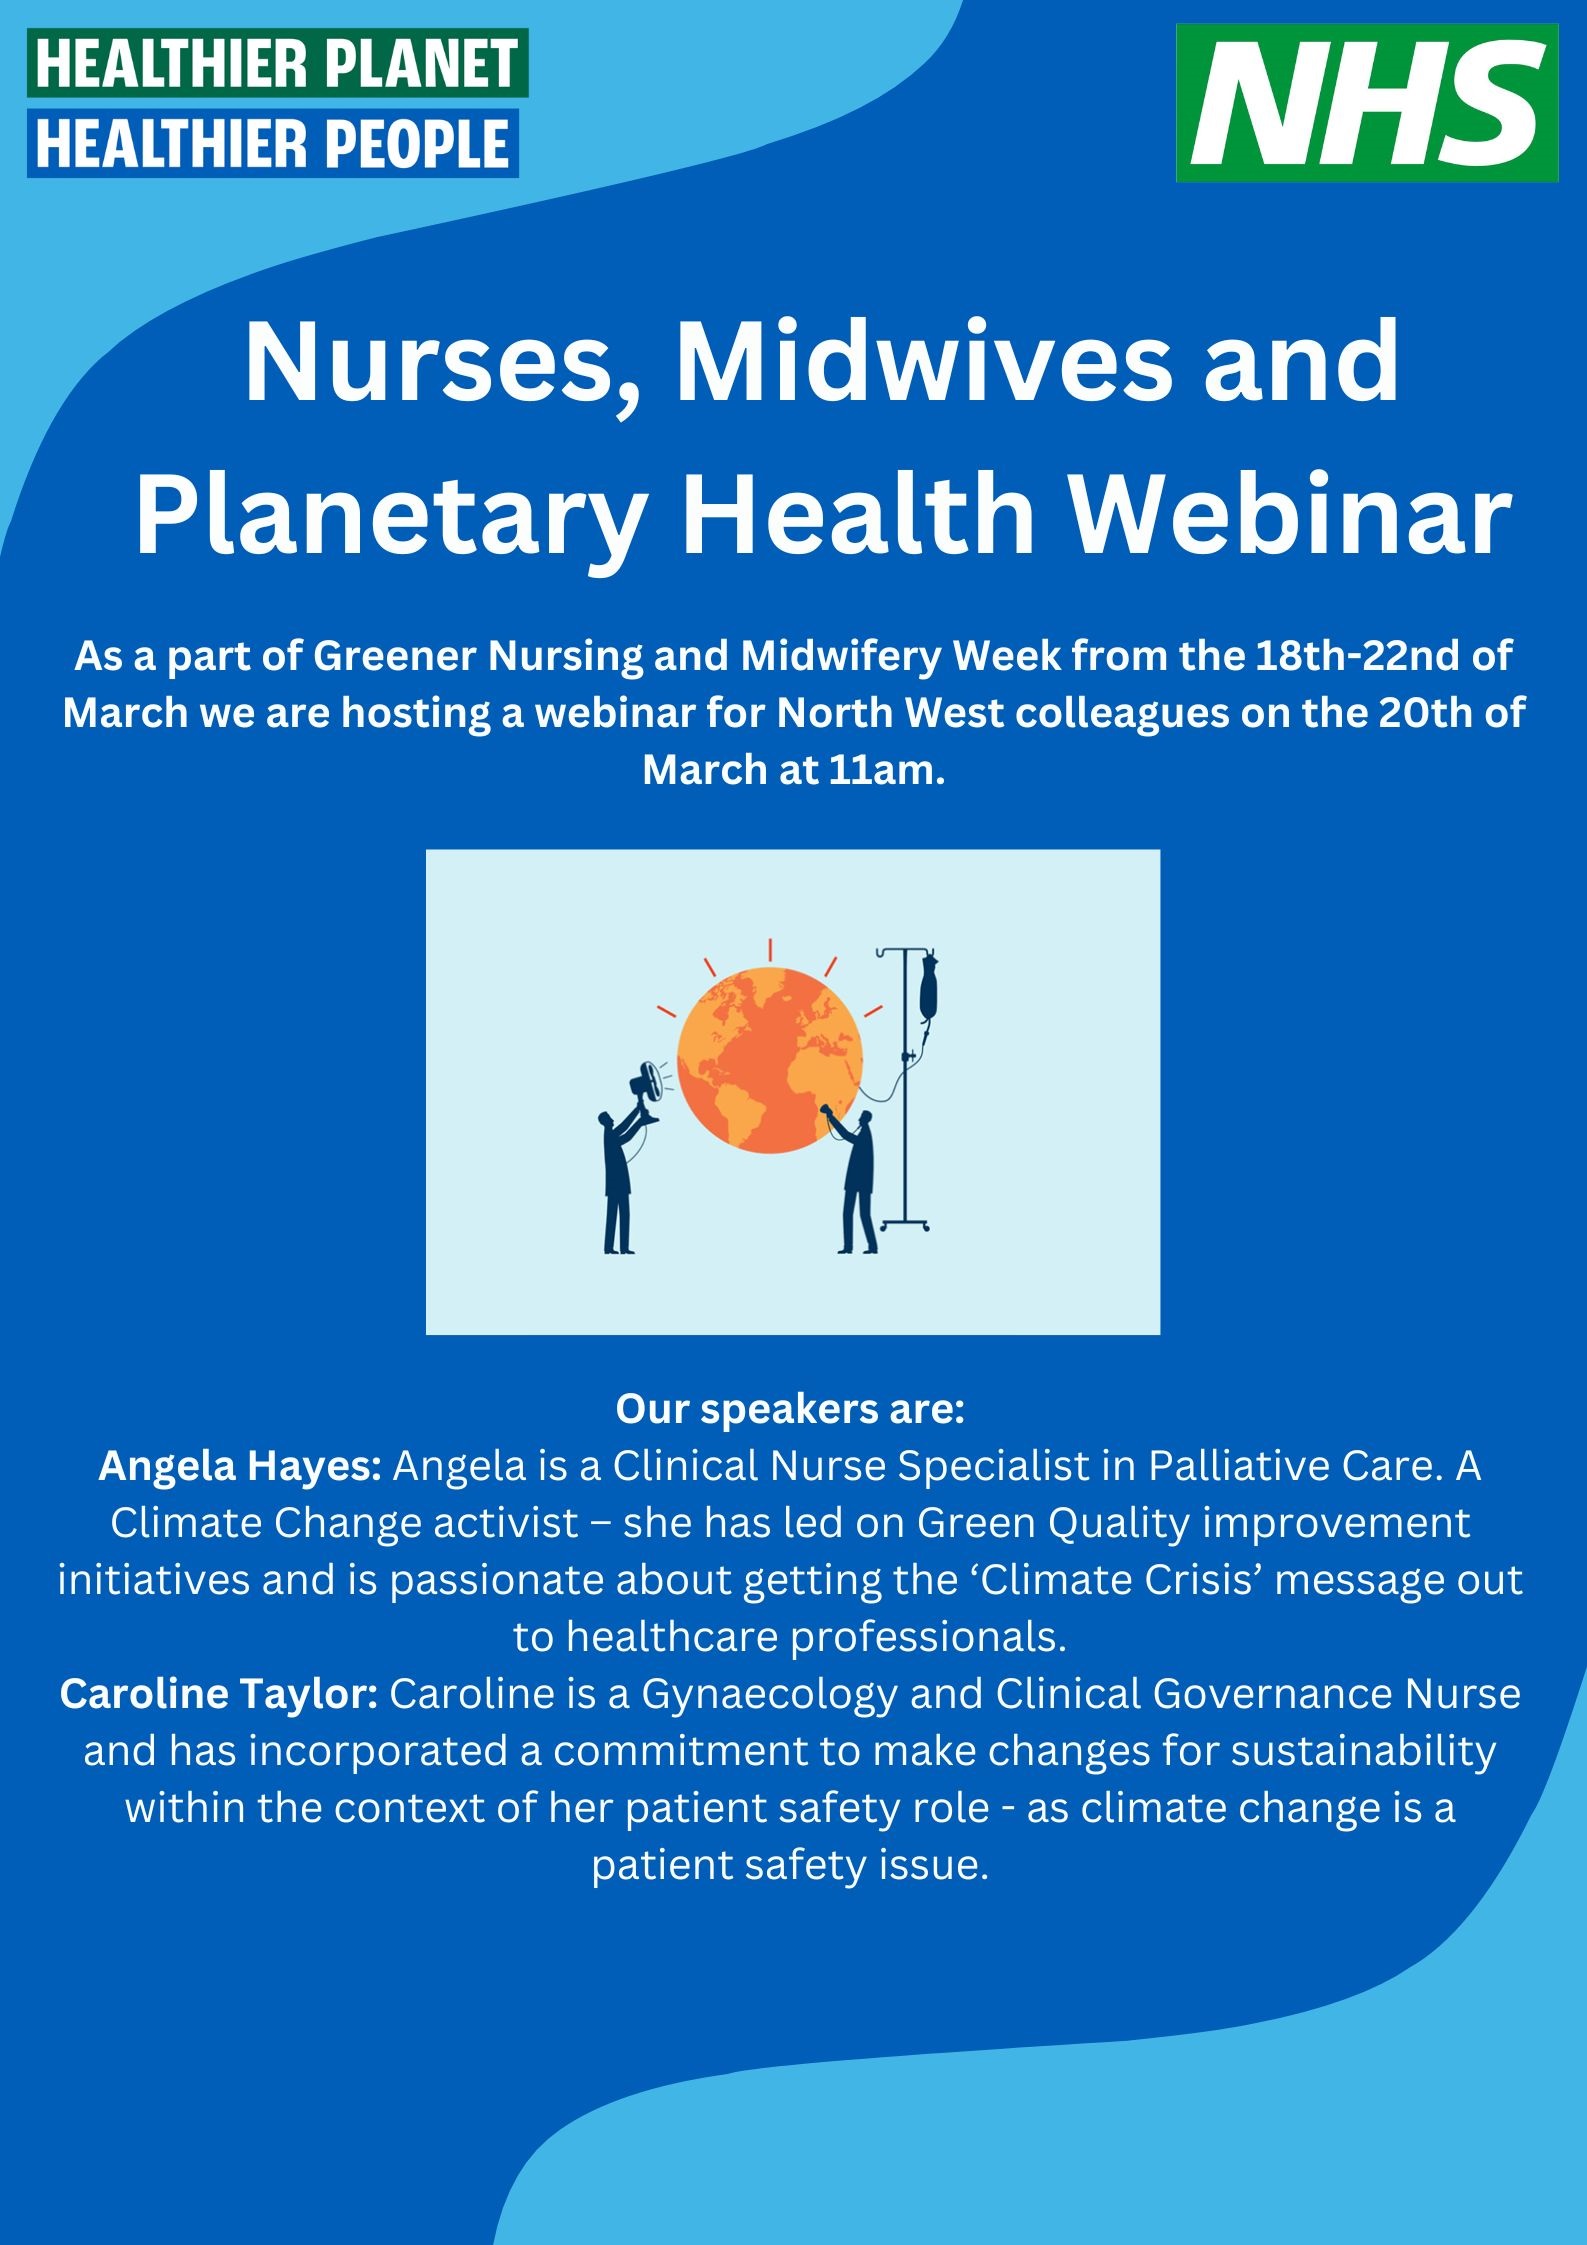 Nurses, Midwives and Planetary Health